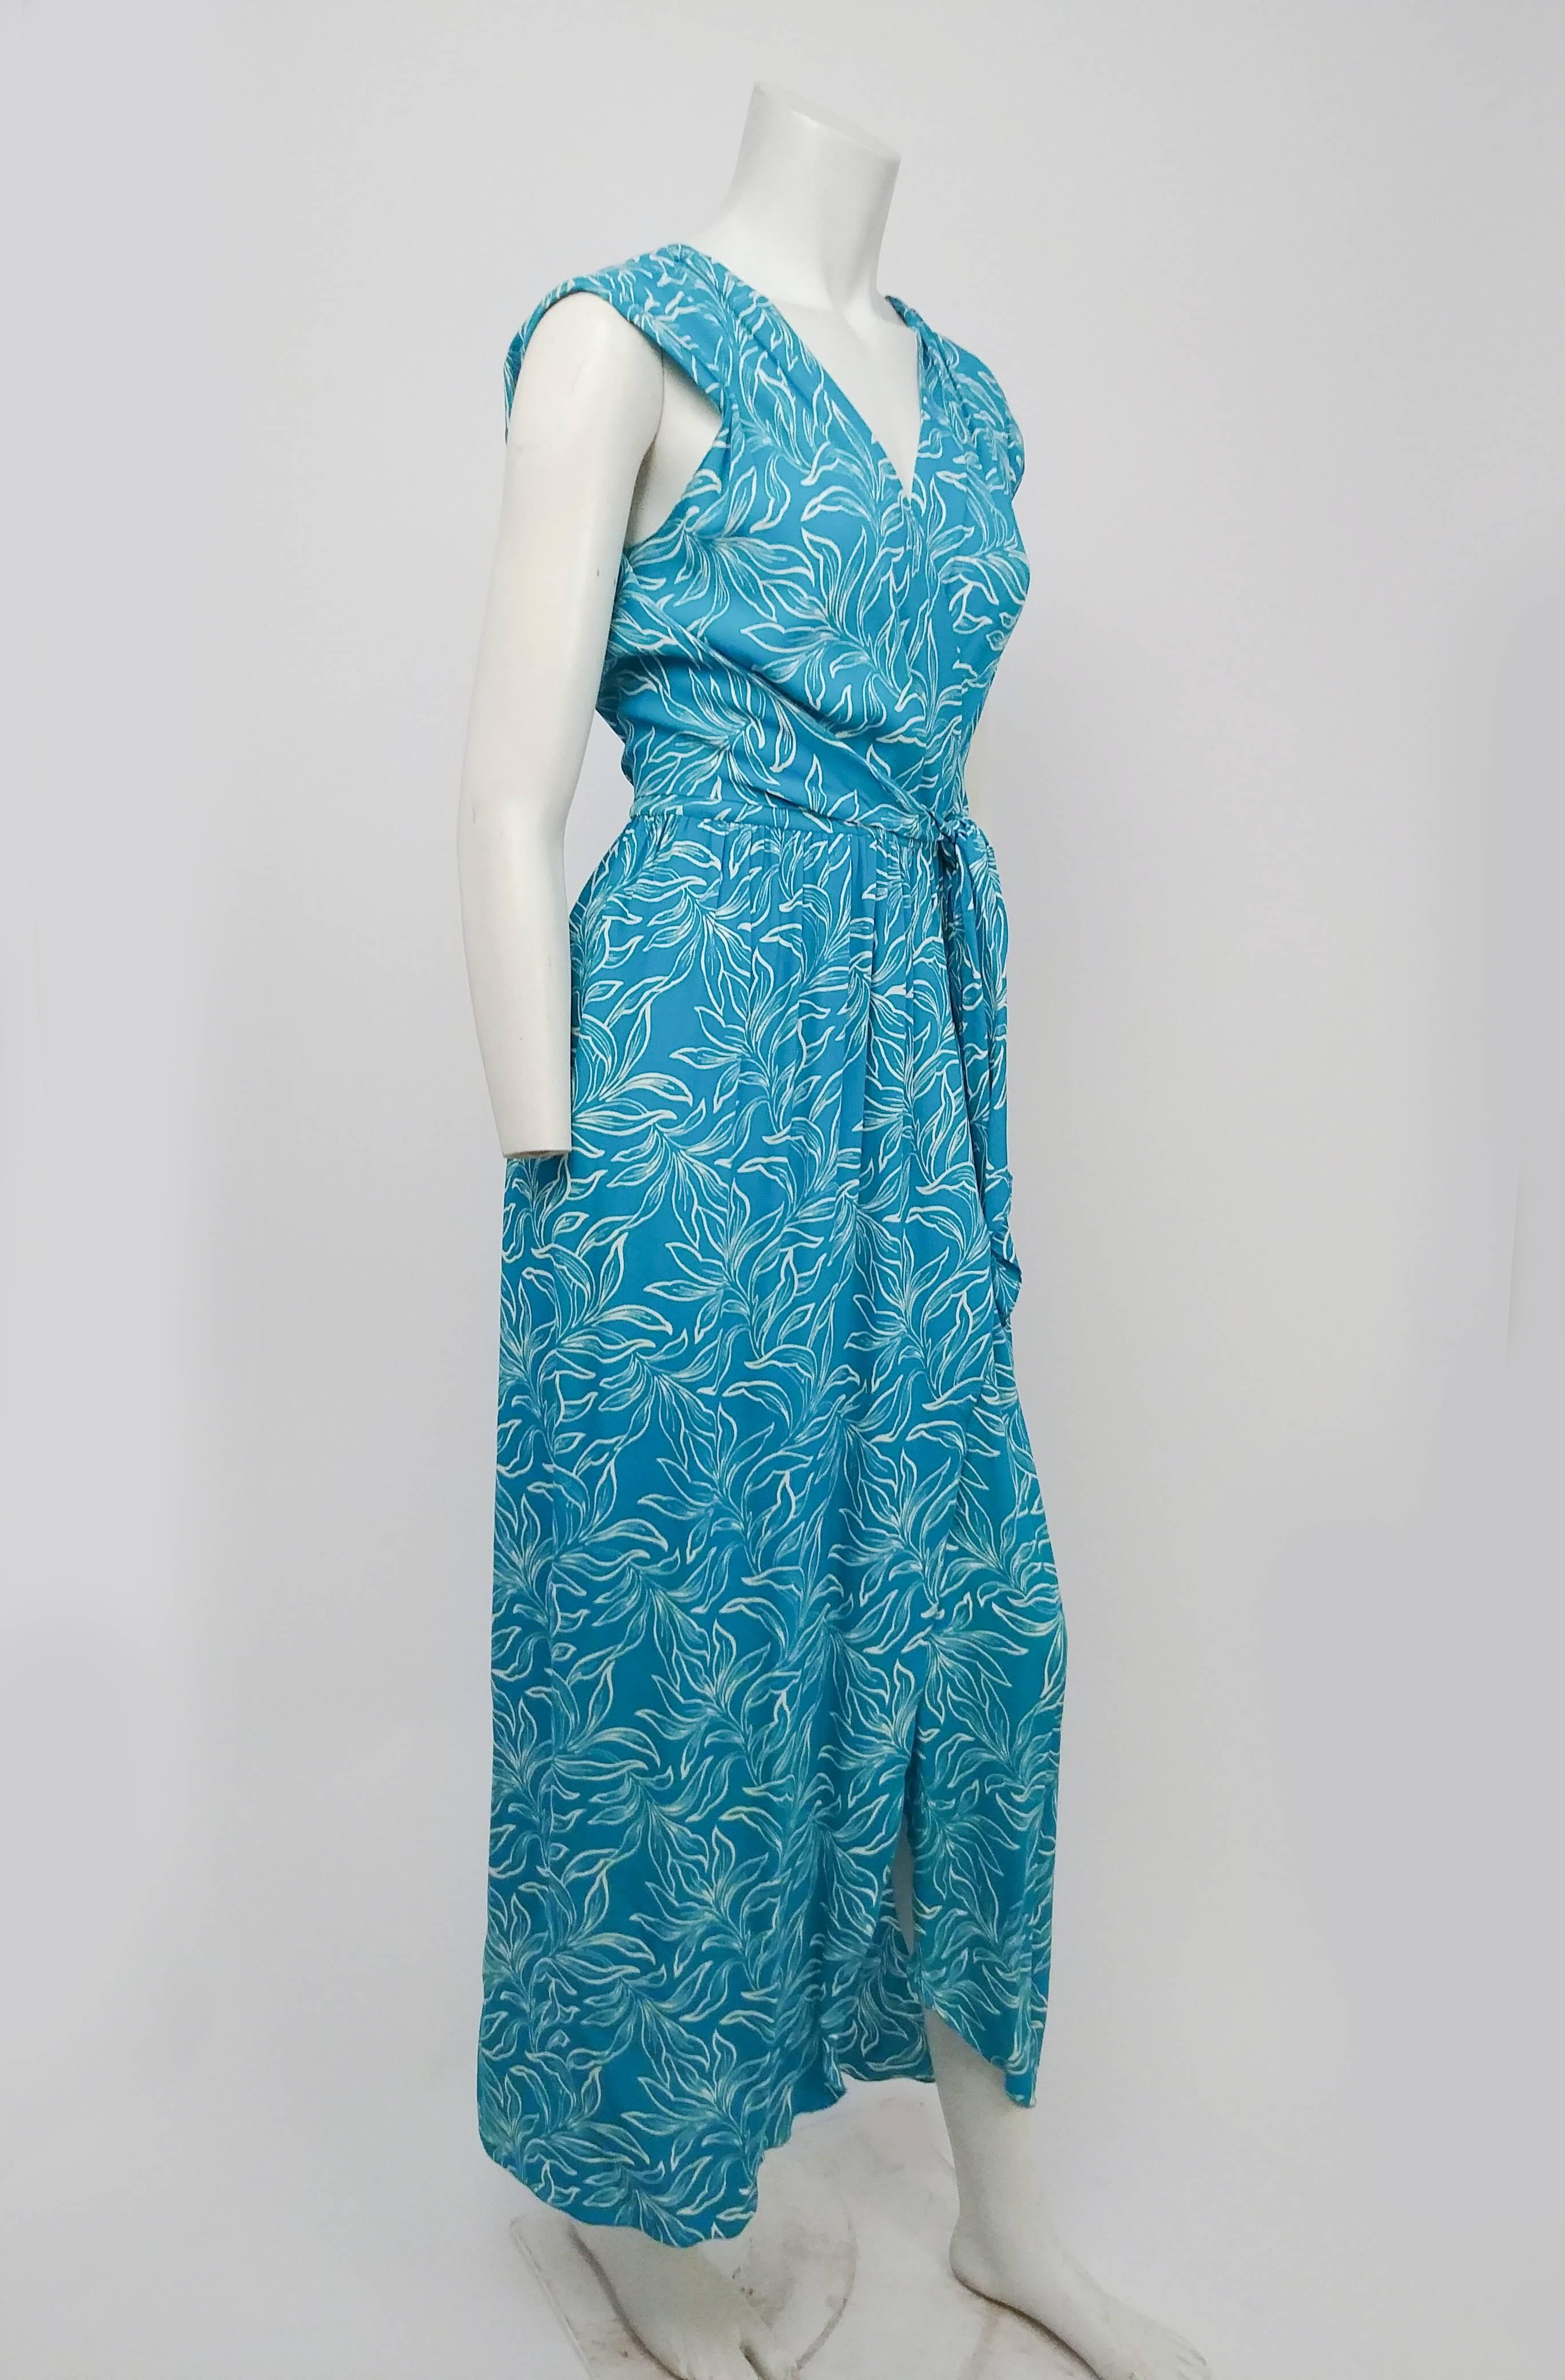 1970s Adele Simpson Summer Wrap Dress w/ Cowl Back. Cerulean blue printed crepe fabric snaps closed at waist. Cowl neck back is weighed down for perfect drape, and extends around to front to tie around waist. 